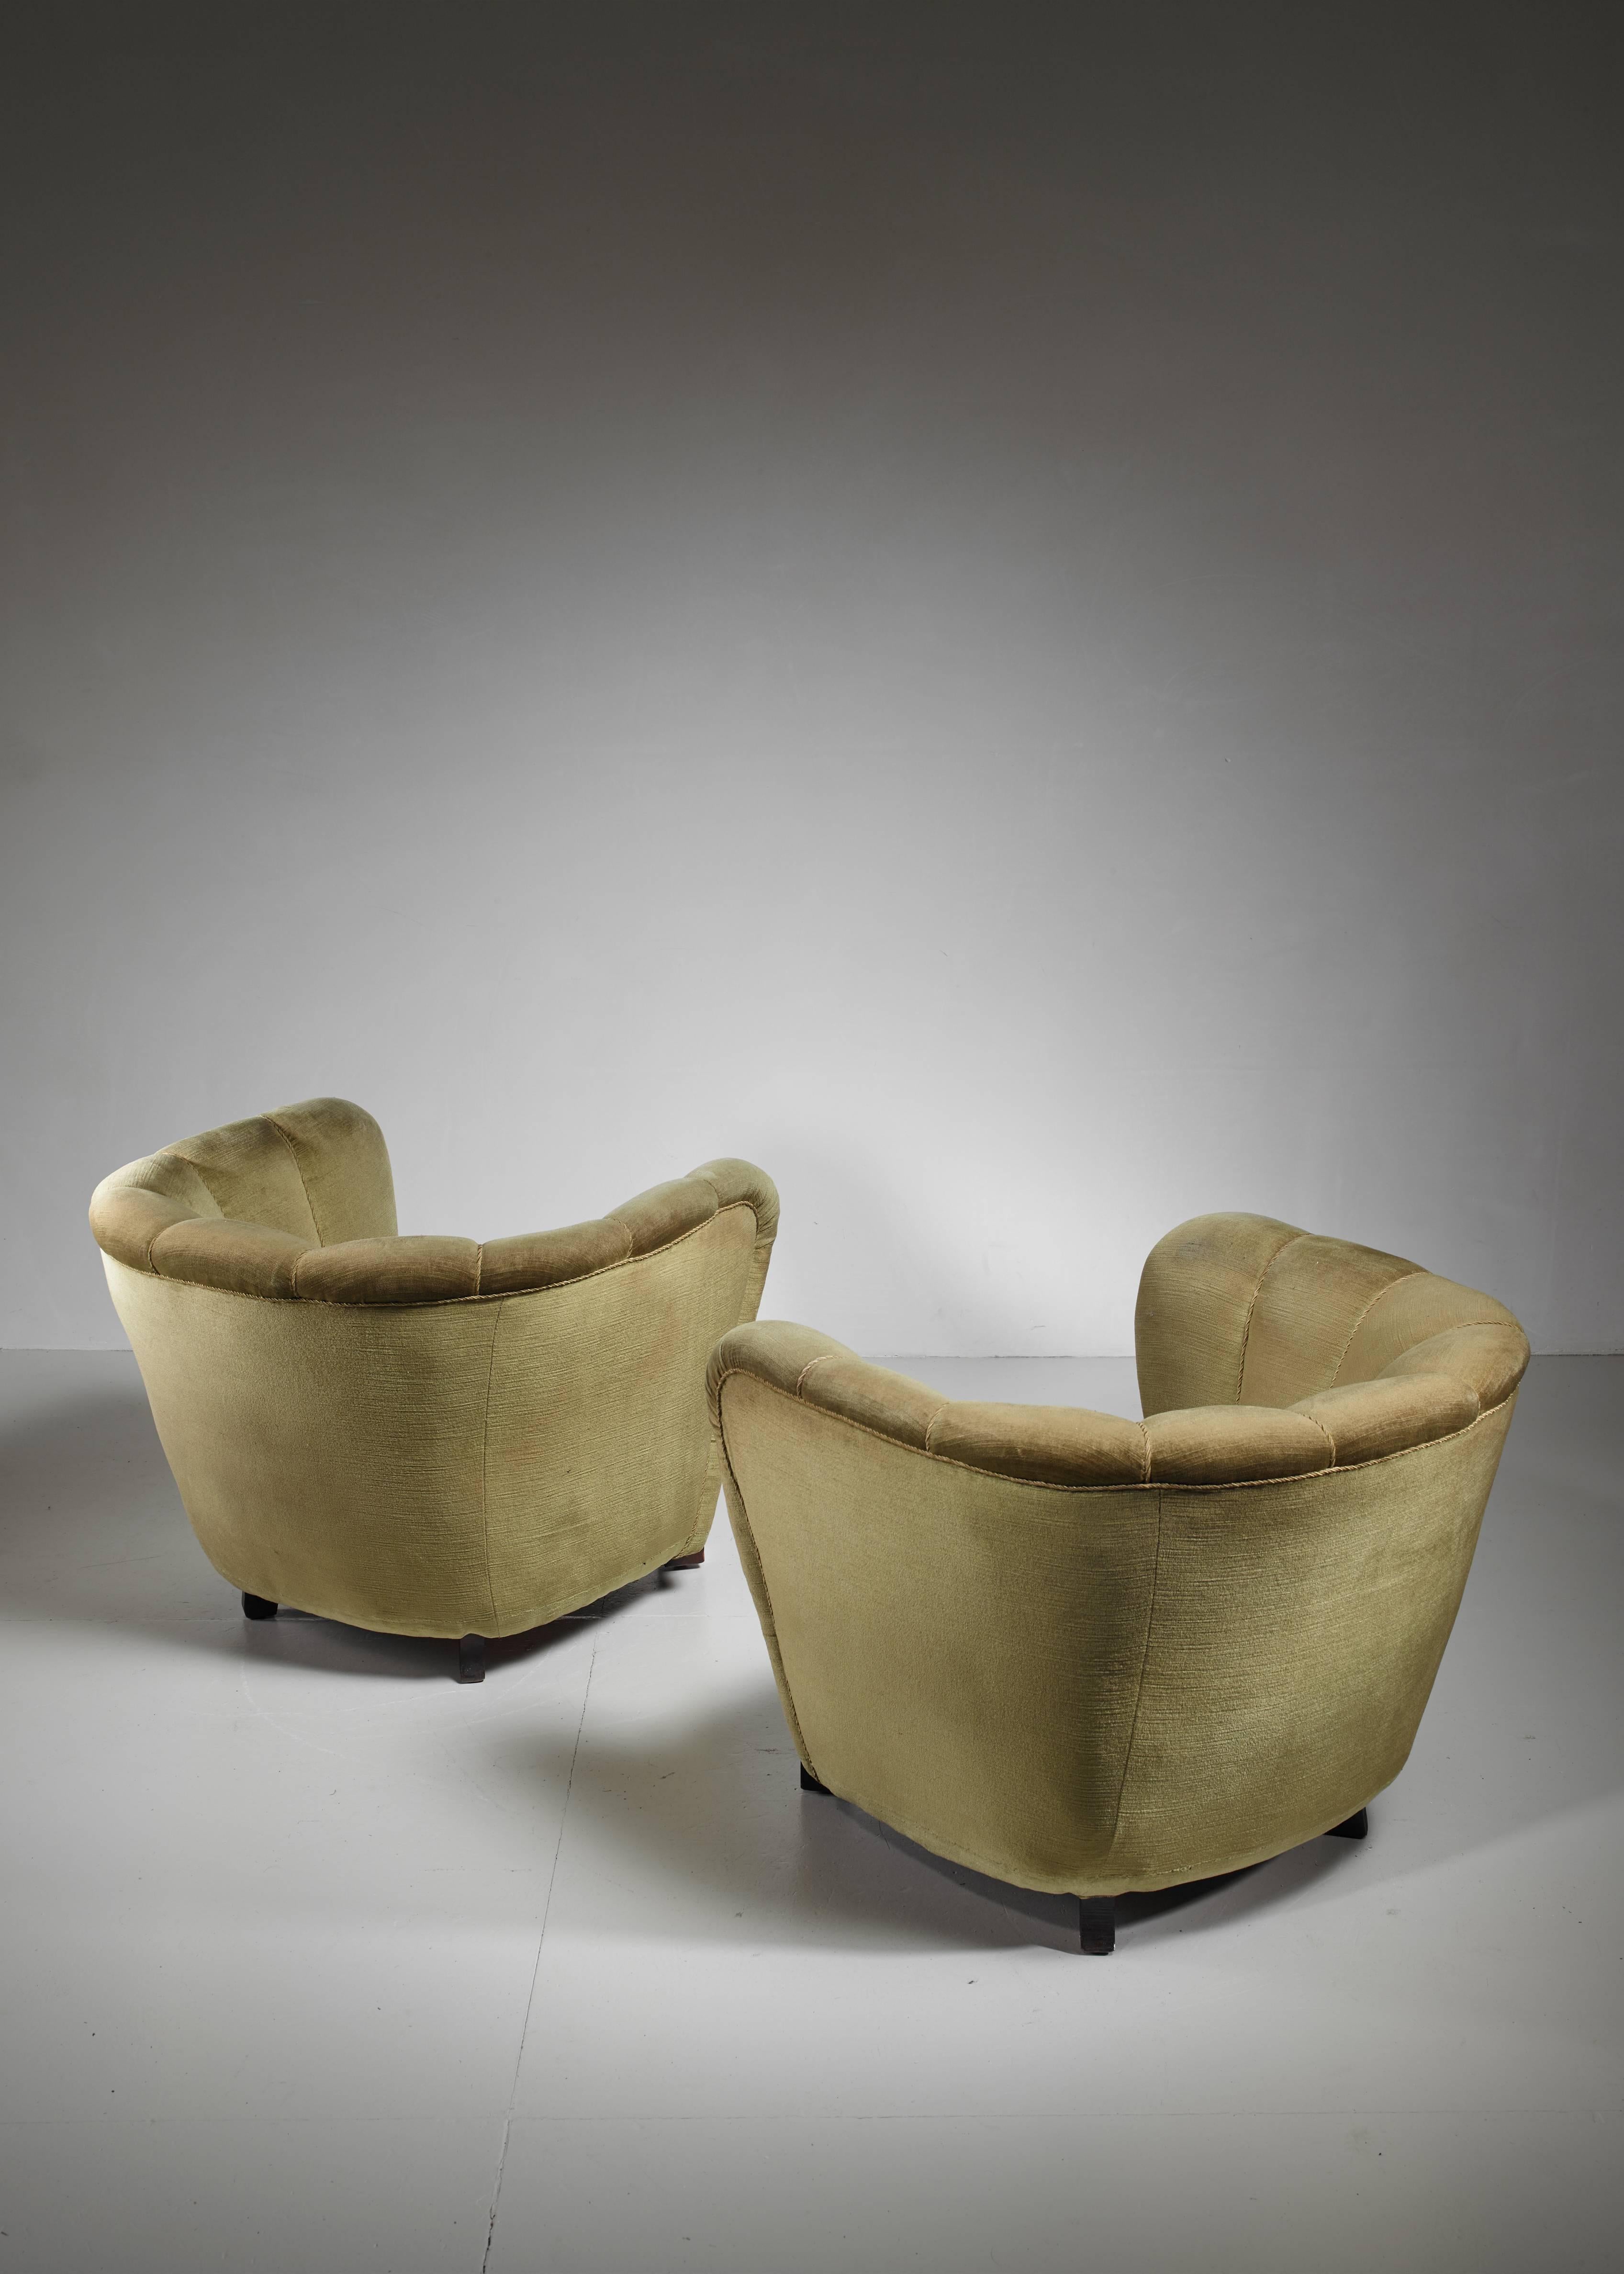 Danish Pair of Club Chairs with Green Velour Upholstery, Denmark, 1940s For Sale